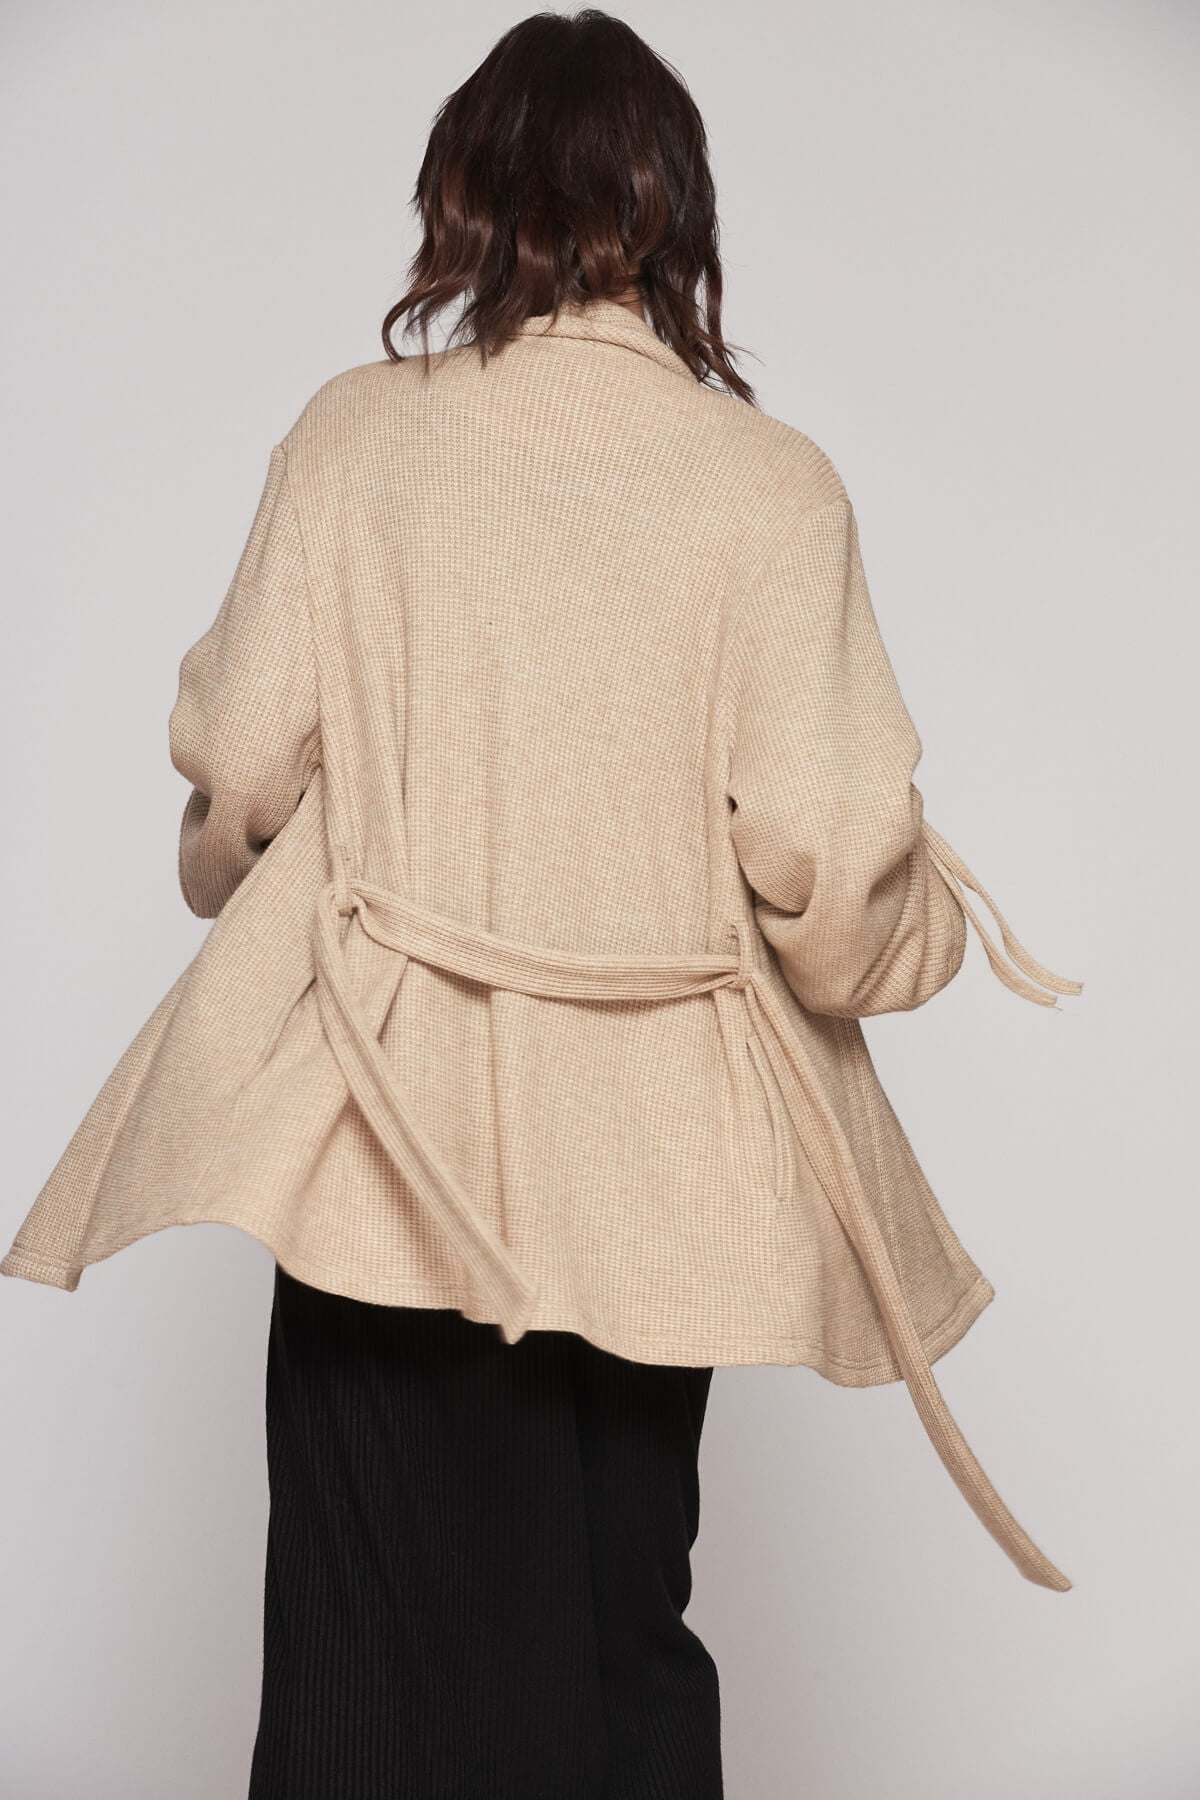 Wide sleeve cardigan with adjustable string length system here to warm up every cold autumn day.